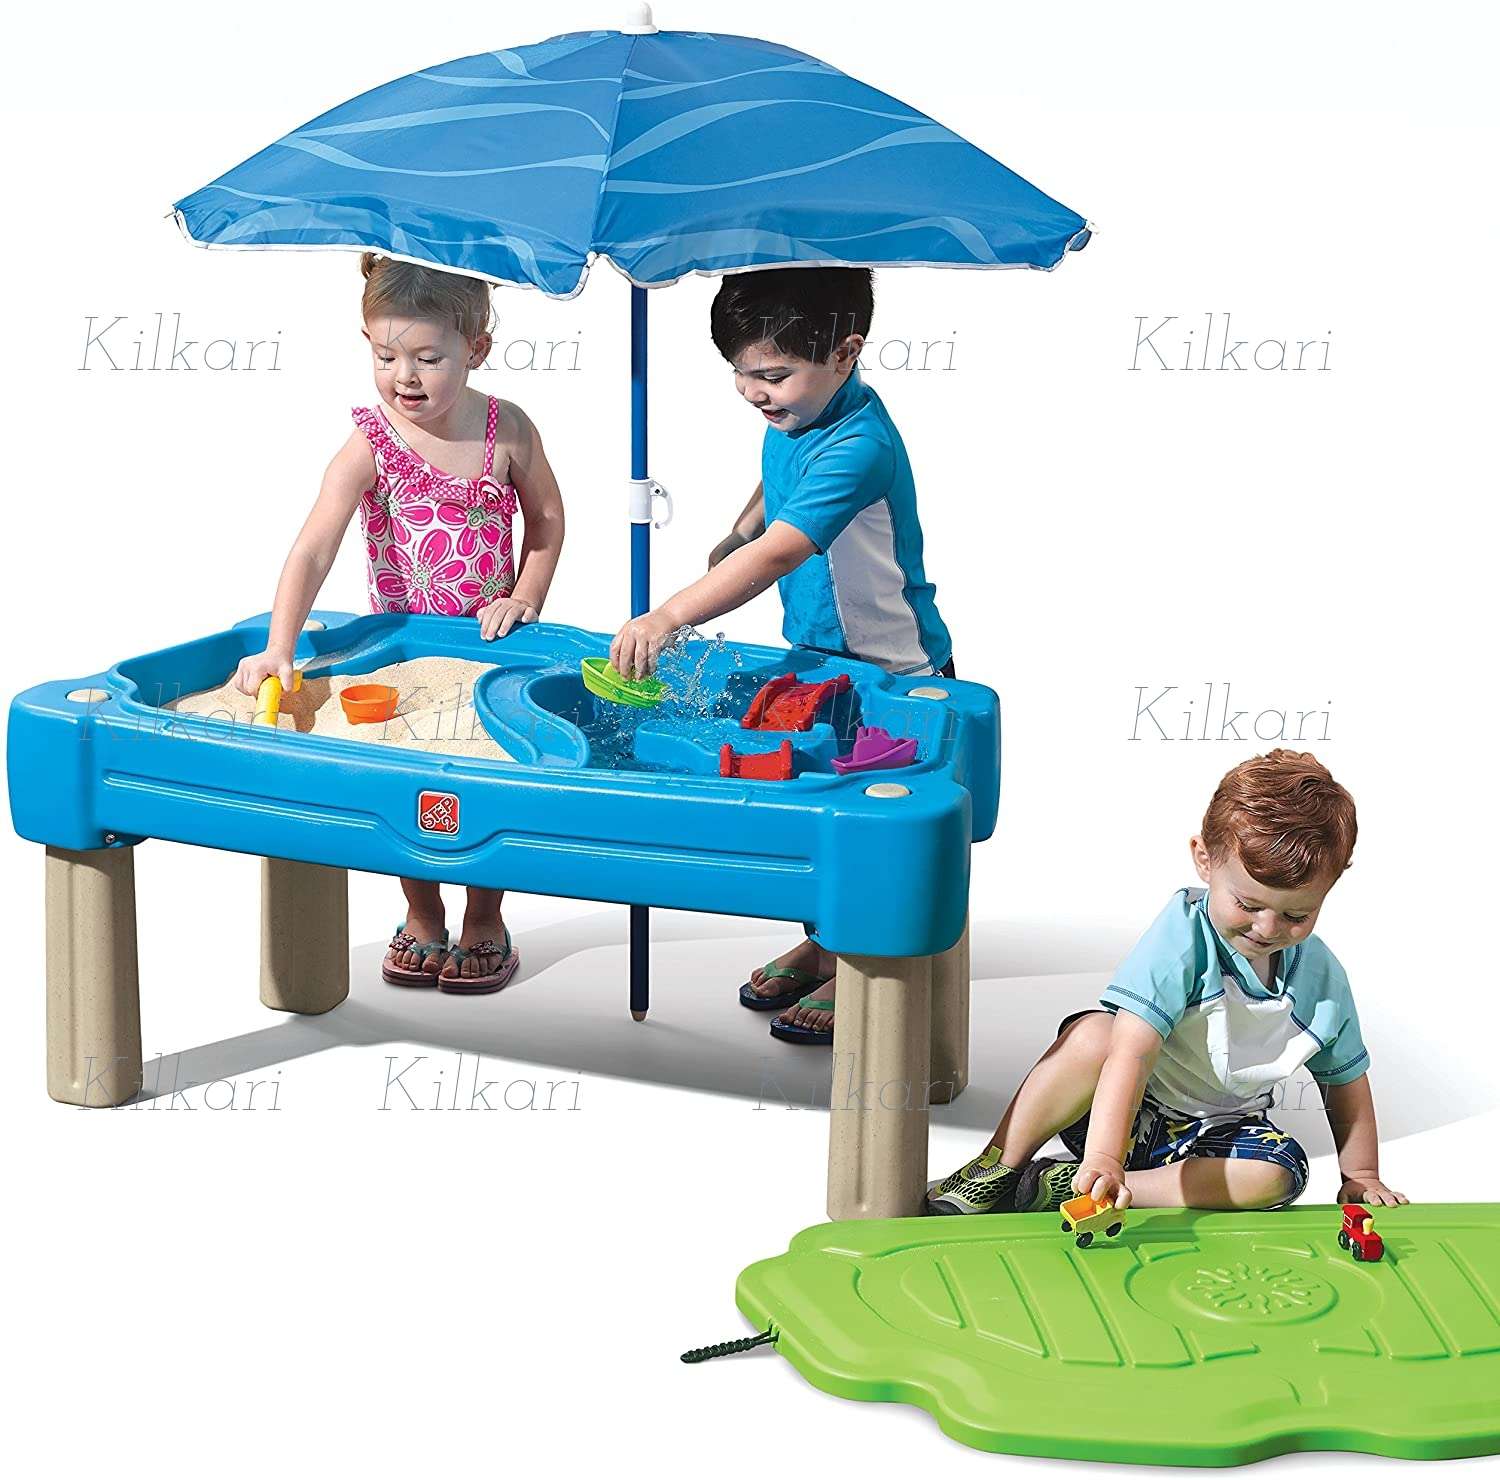  Play School Toys Manufacturers in Goa